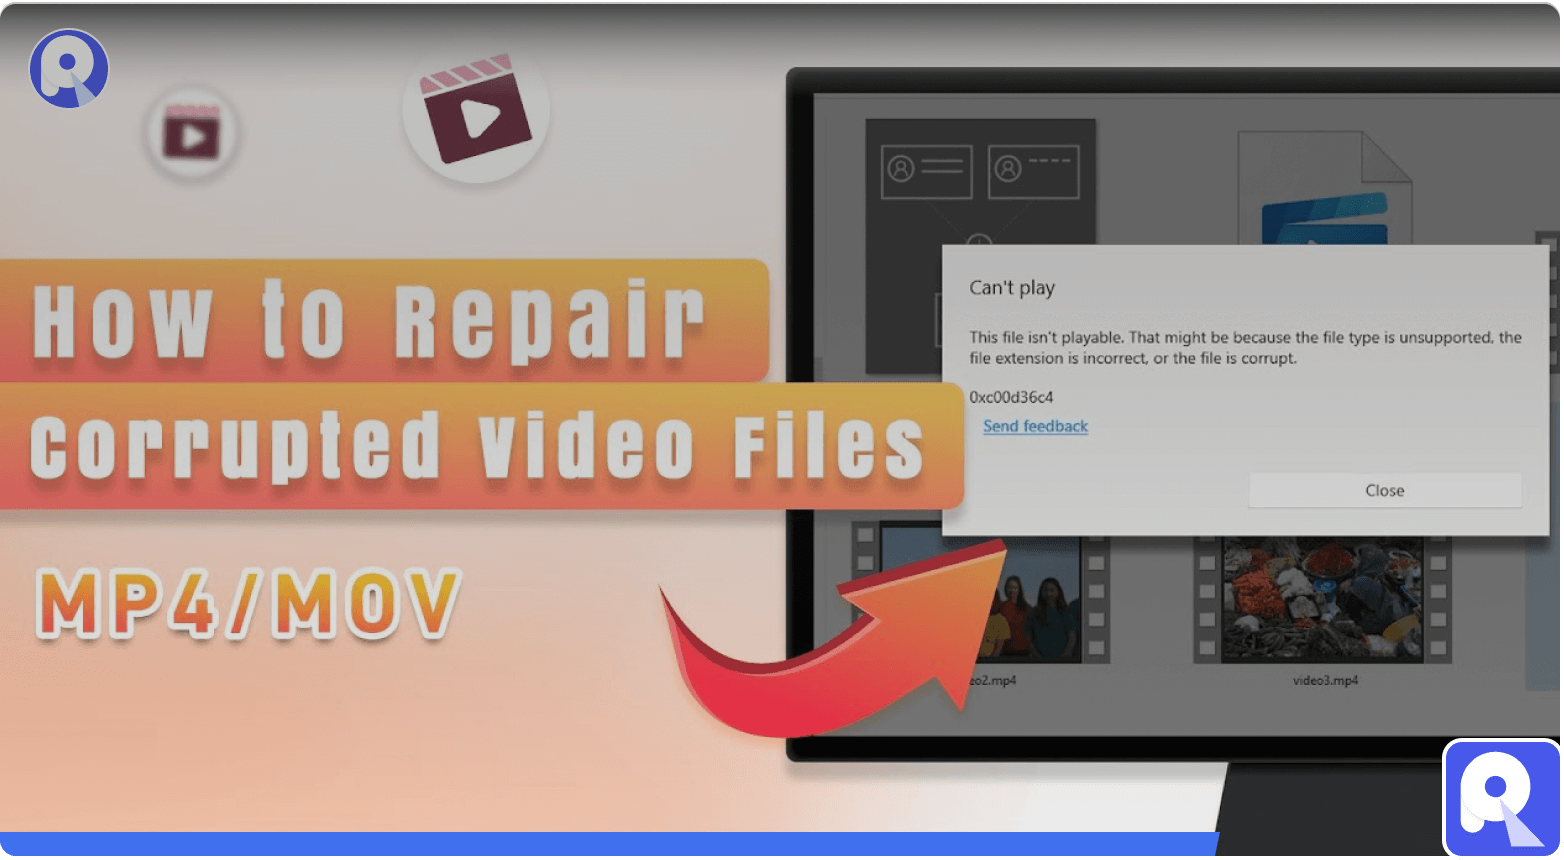 YouTube Video about restoring permanently deleted files windows 10